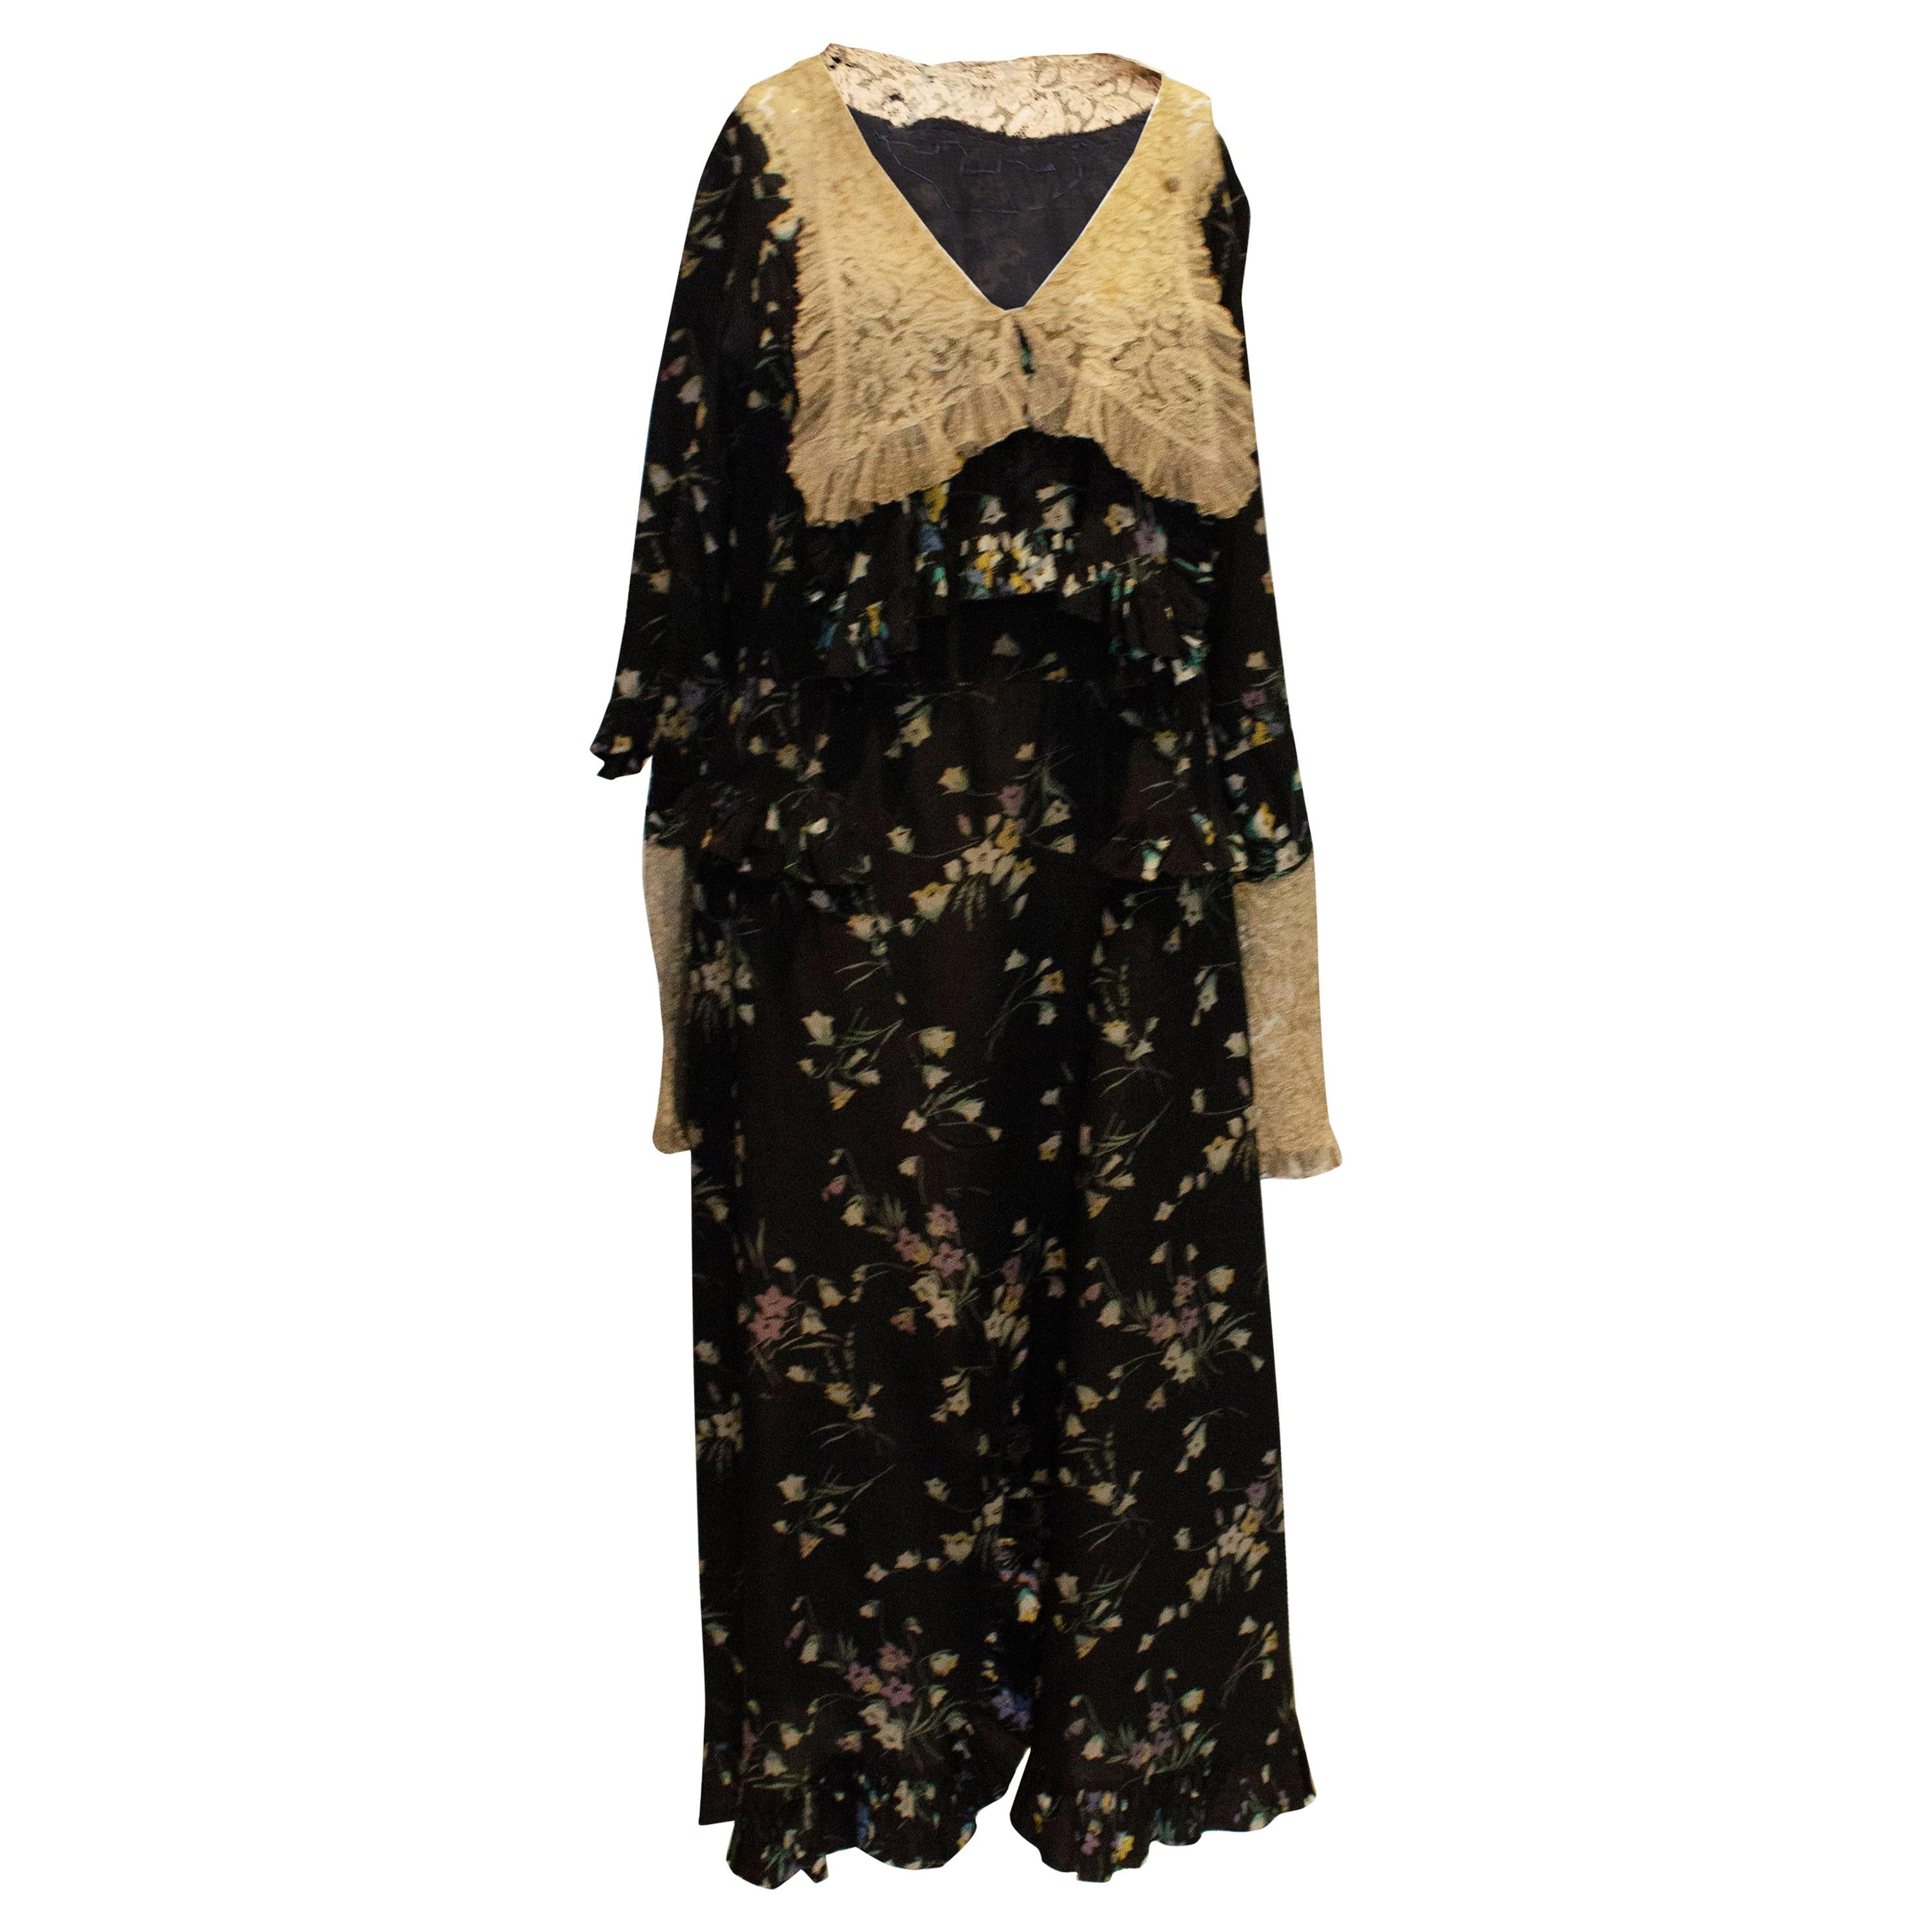 Vintage 1920s Silk and Lace Dress